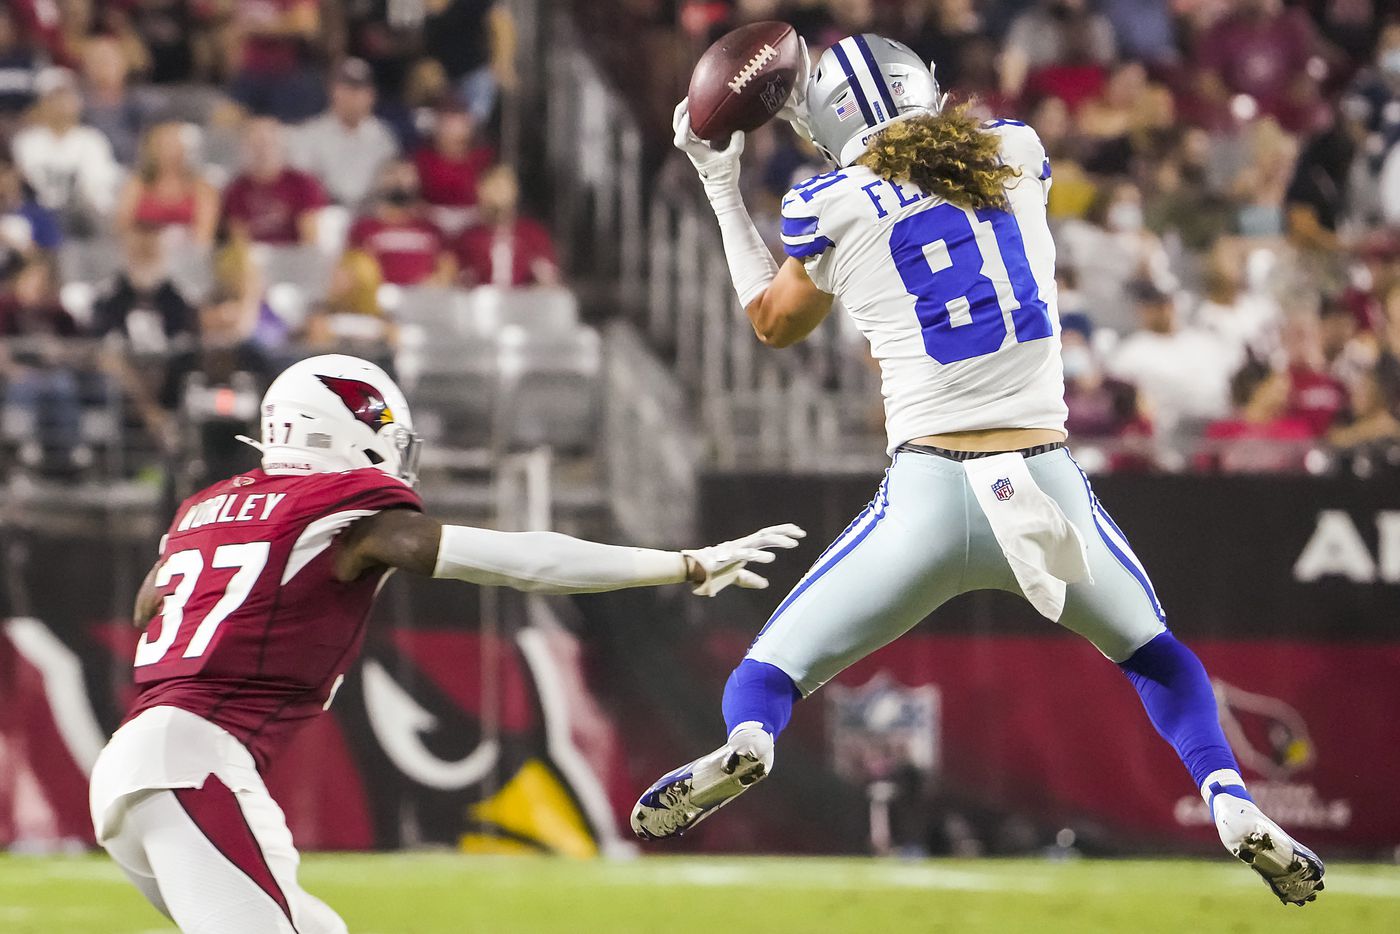 Dallas Cowboys wide receiver Simi Fehoko (81) catches a pass as Arizona Cardinals corner back Daryl Worlsey (37) defends during the second quarter of an NFL football game at State Farm Stadium on Friday, Aug. 13, 2021, in Glendale, Ariz.